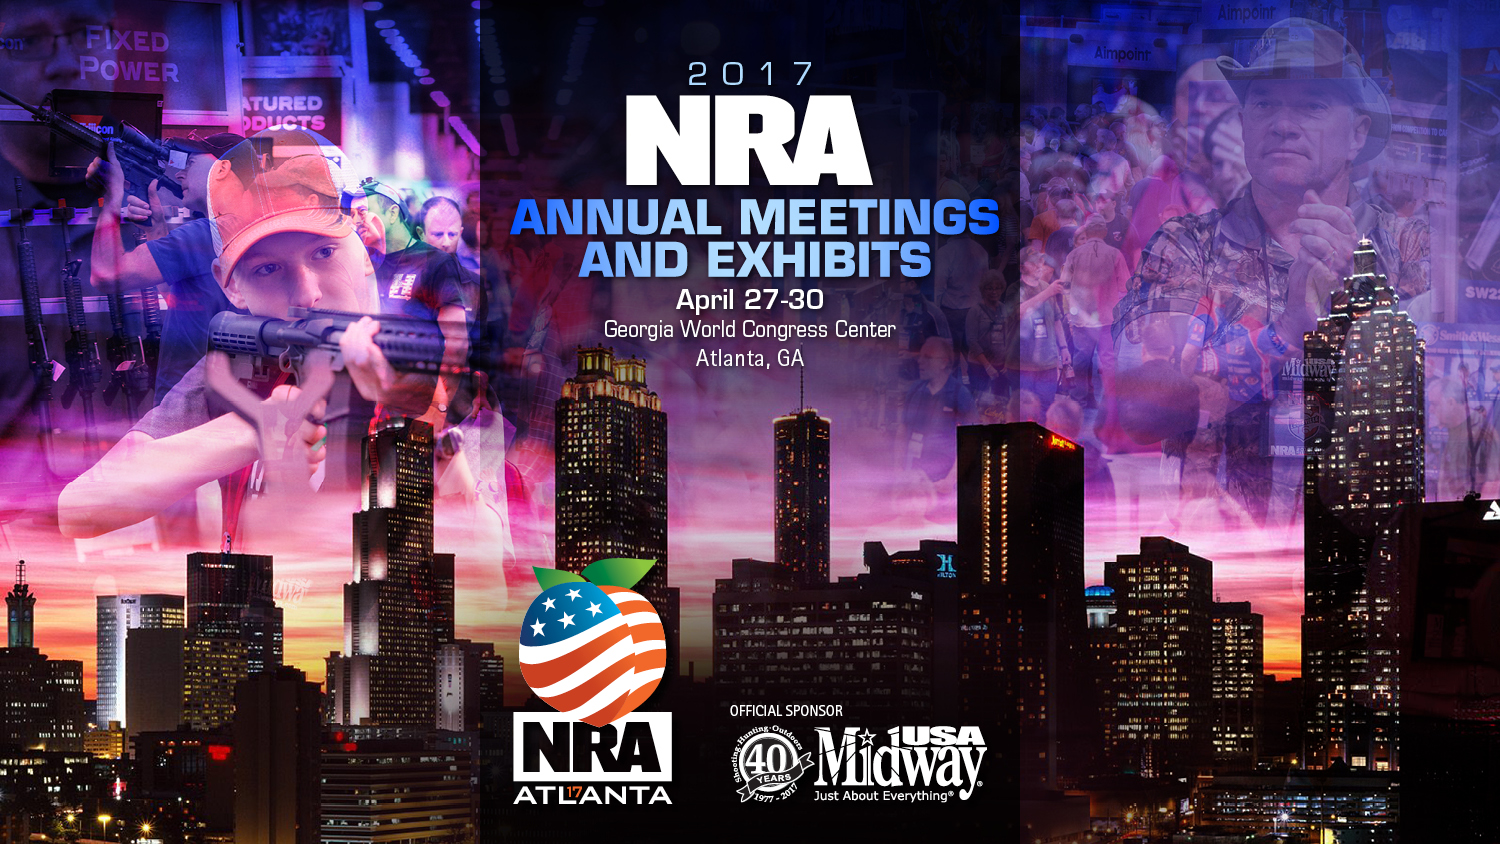 NRA Annual Meeting Events: Friday, April 28th